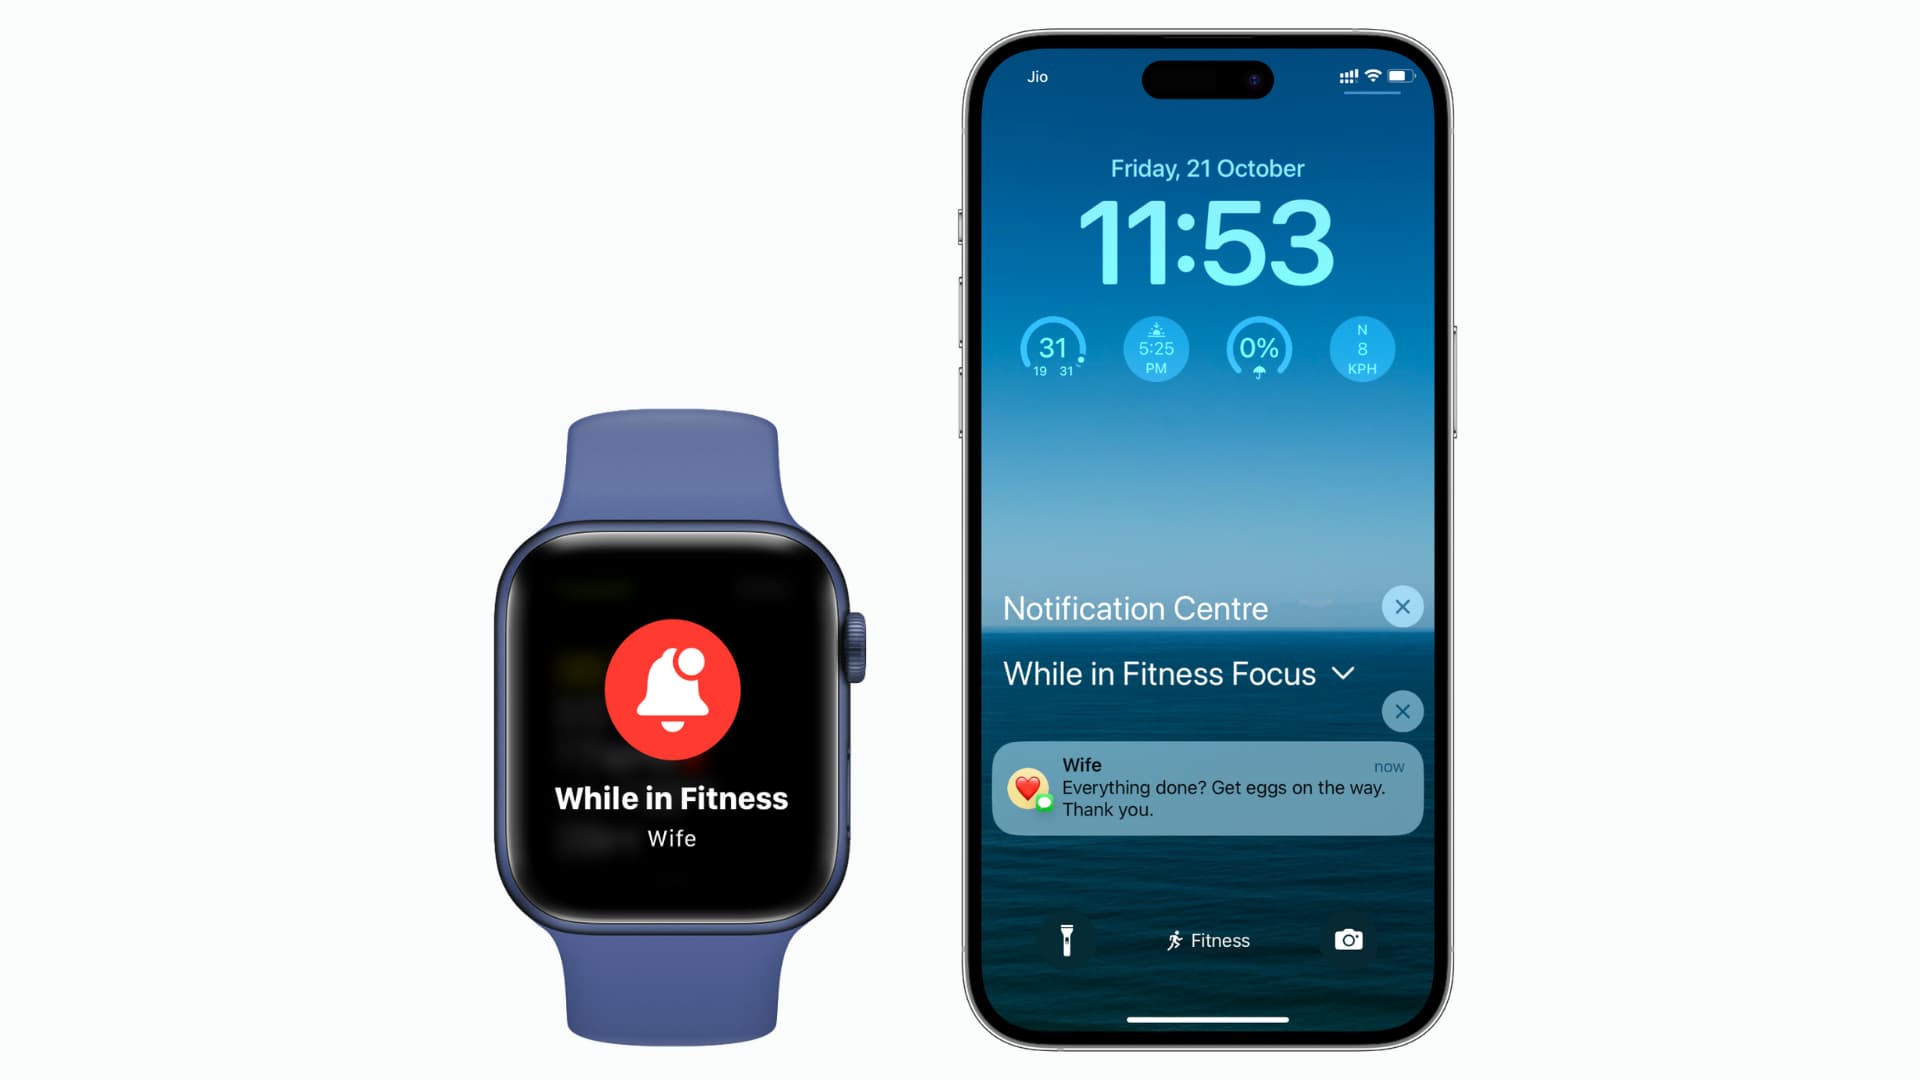 While in Fitness Focus notification on iPhone and Apple Watch